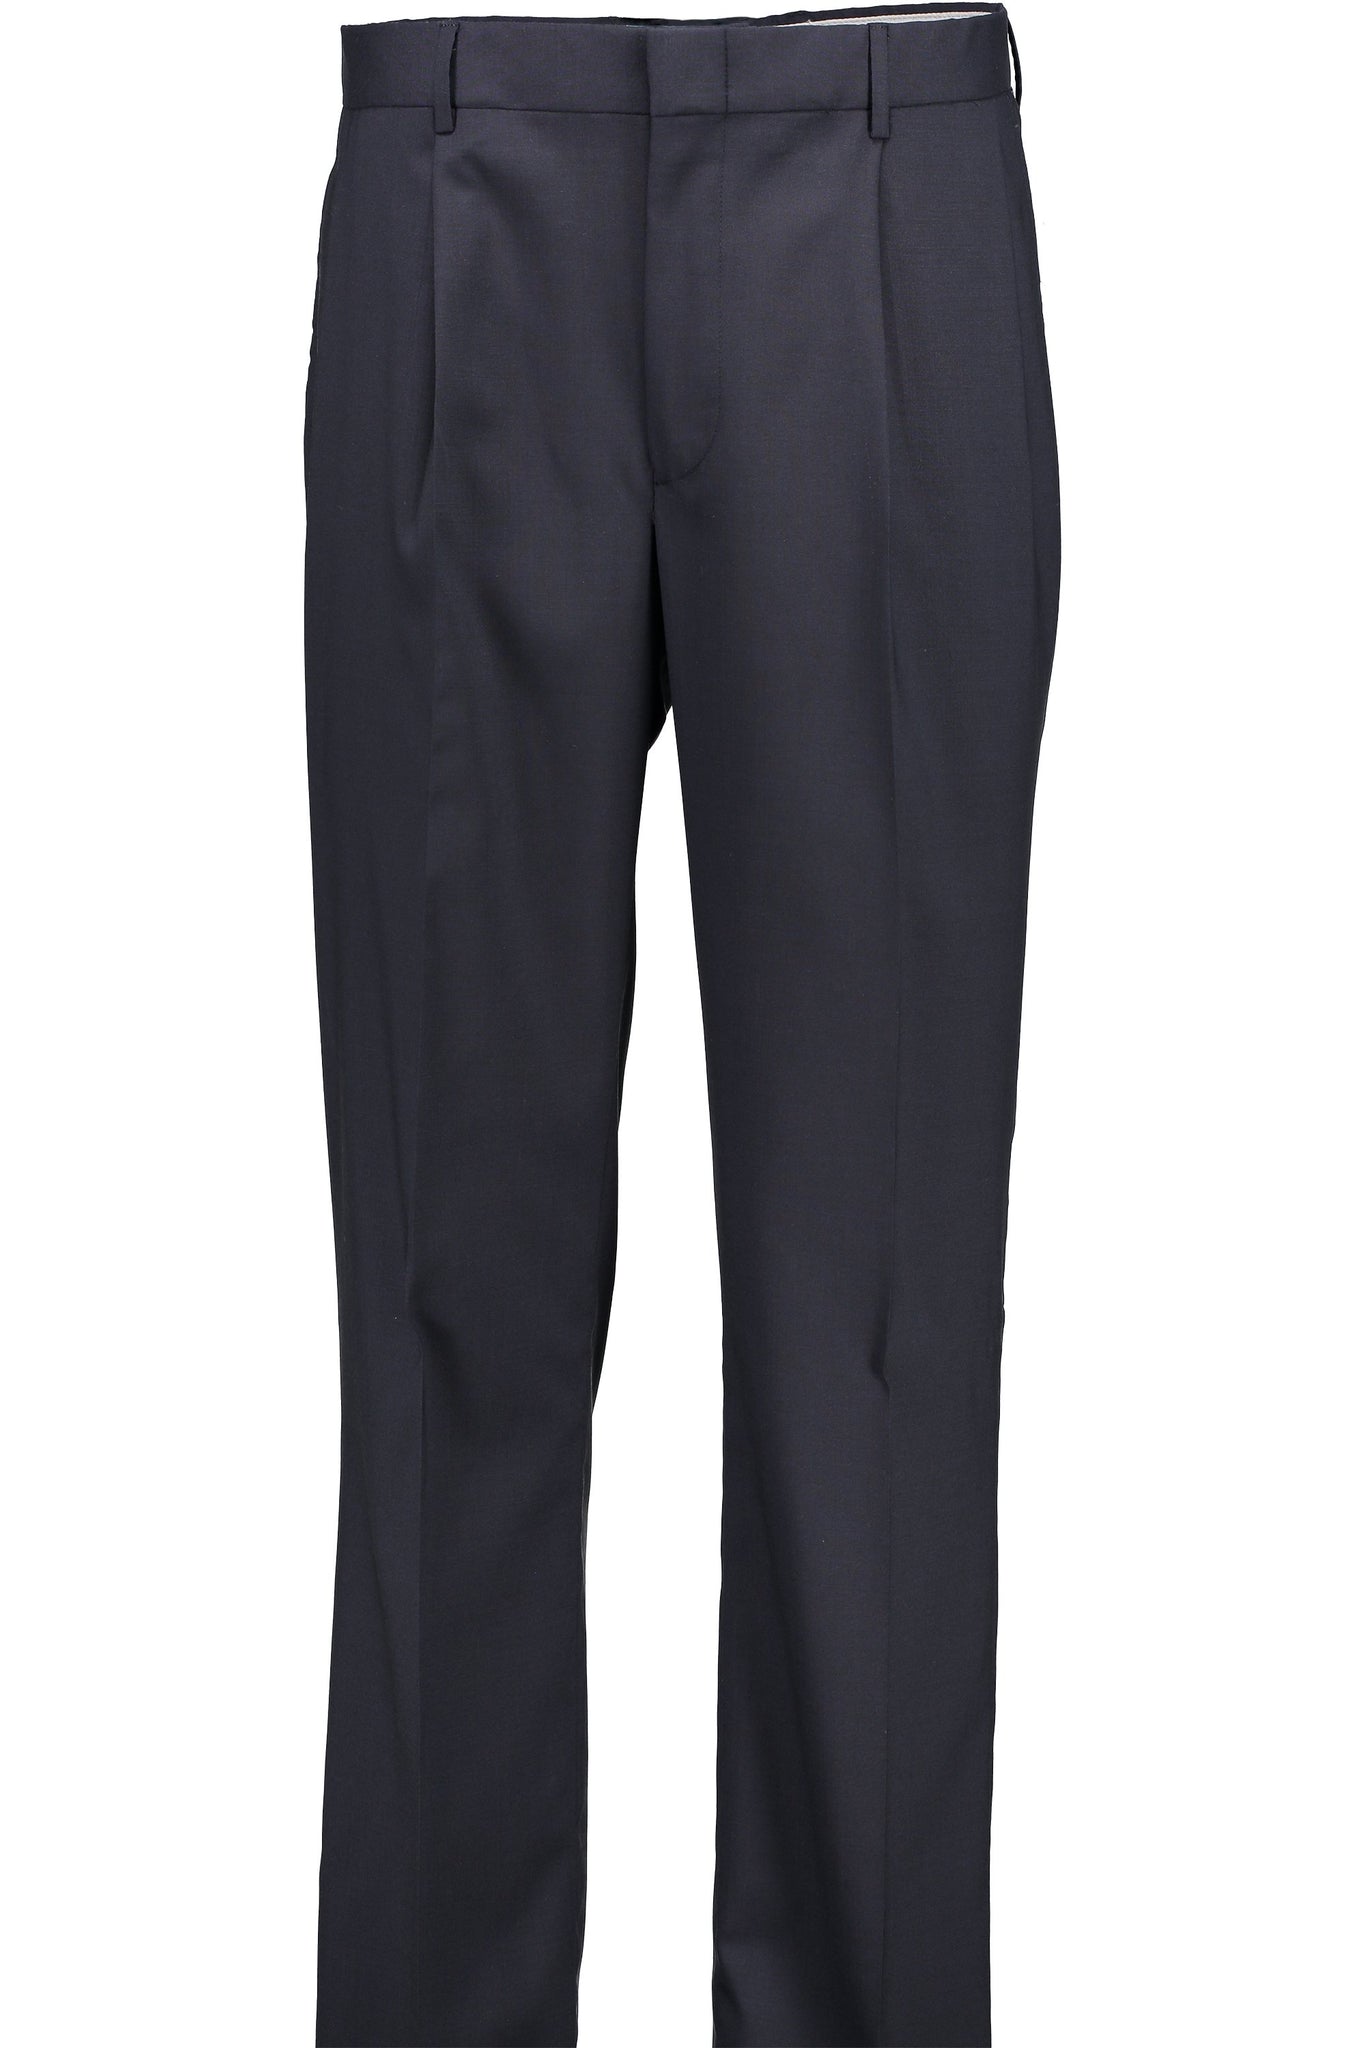 Classic Fit Navy H-Tech Wool Suit Separate Pleated Pant -  Hardwick.com